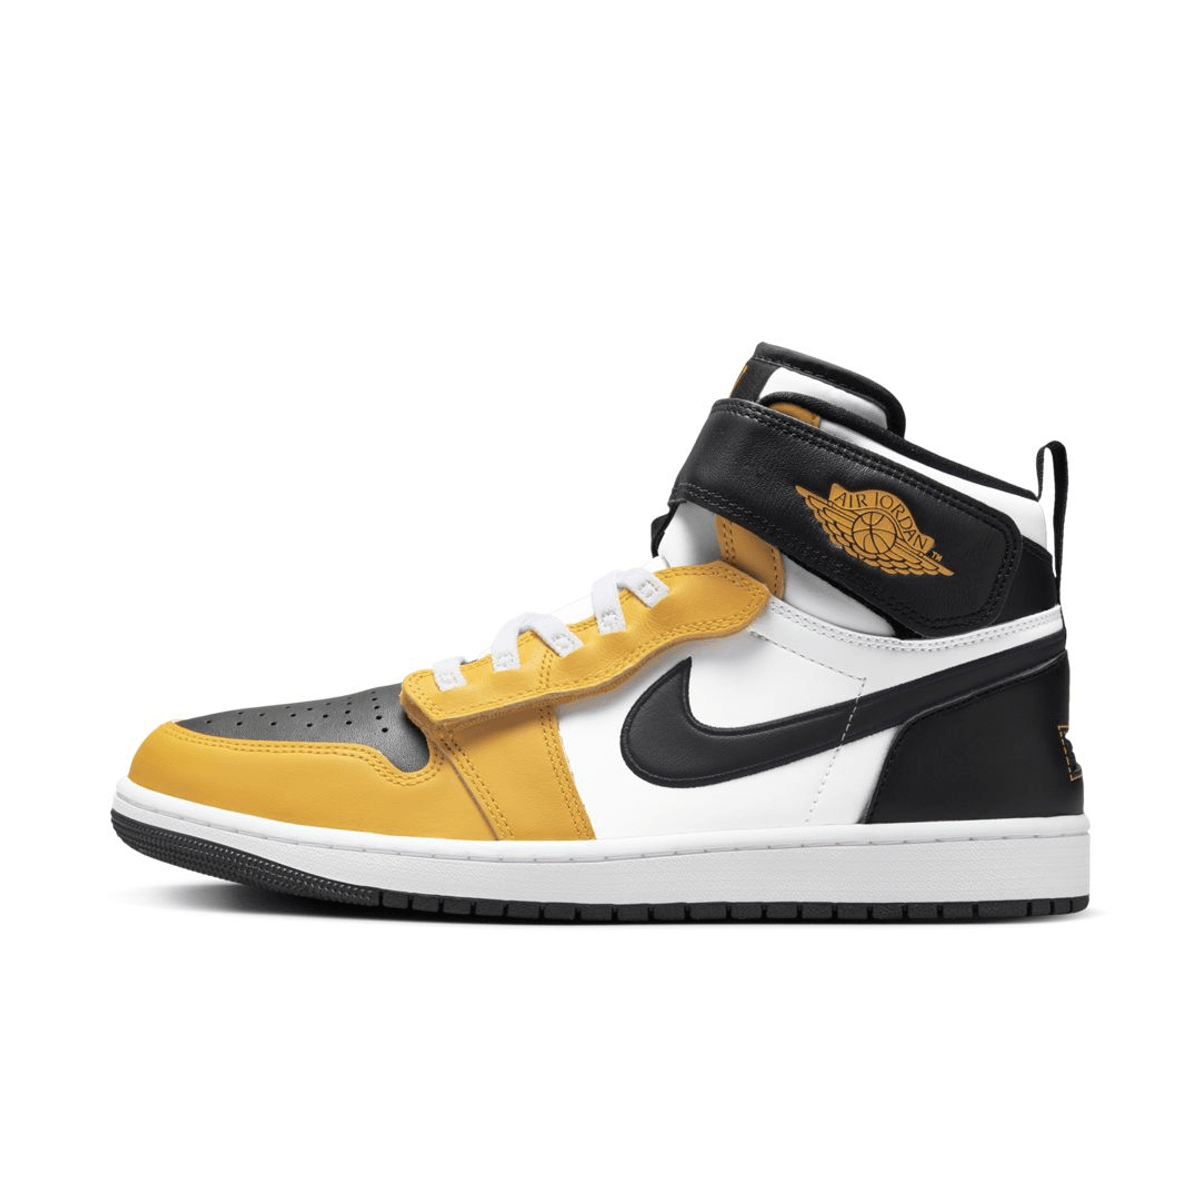 Official Look At The The Air Jordan 1 Flyease "Yellow Ochre"